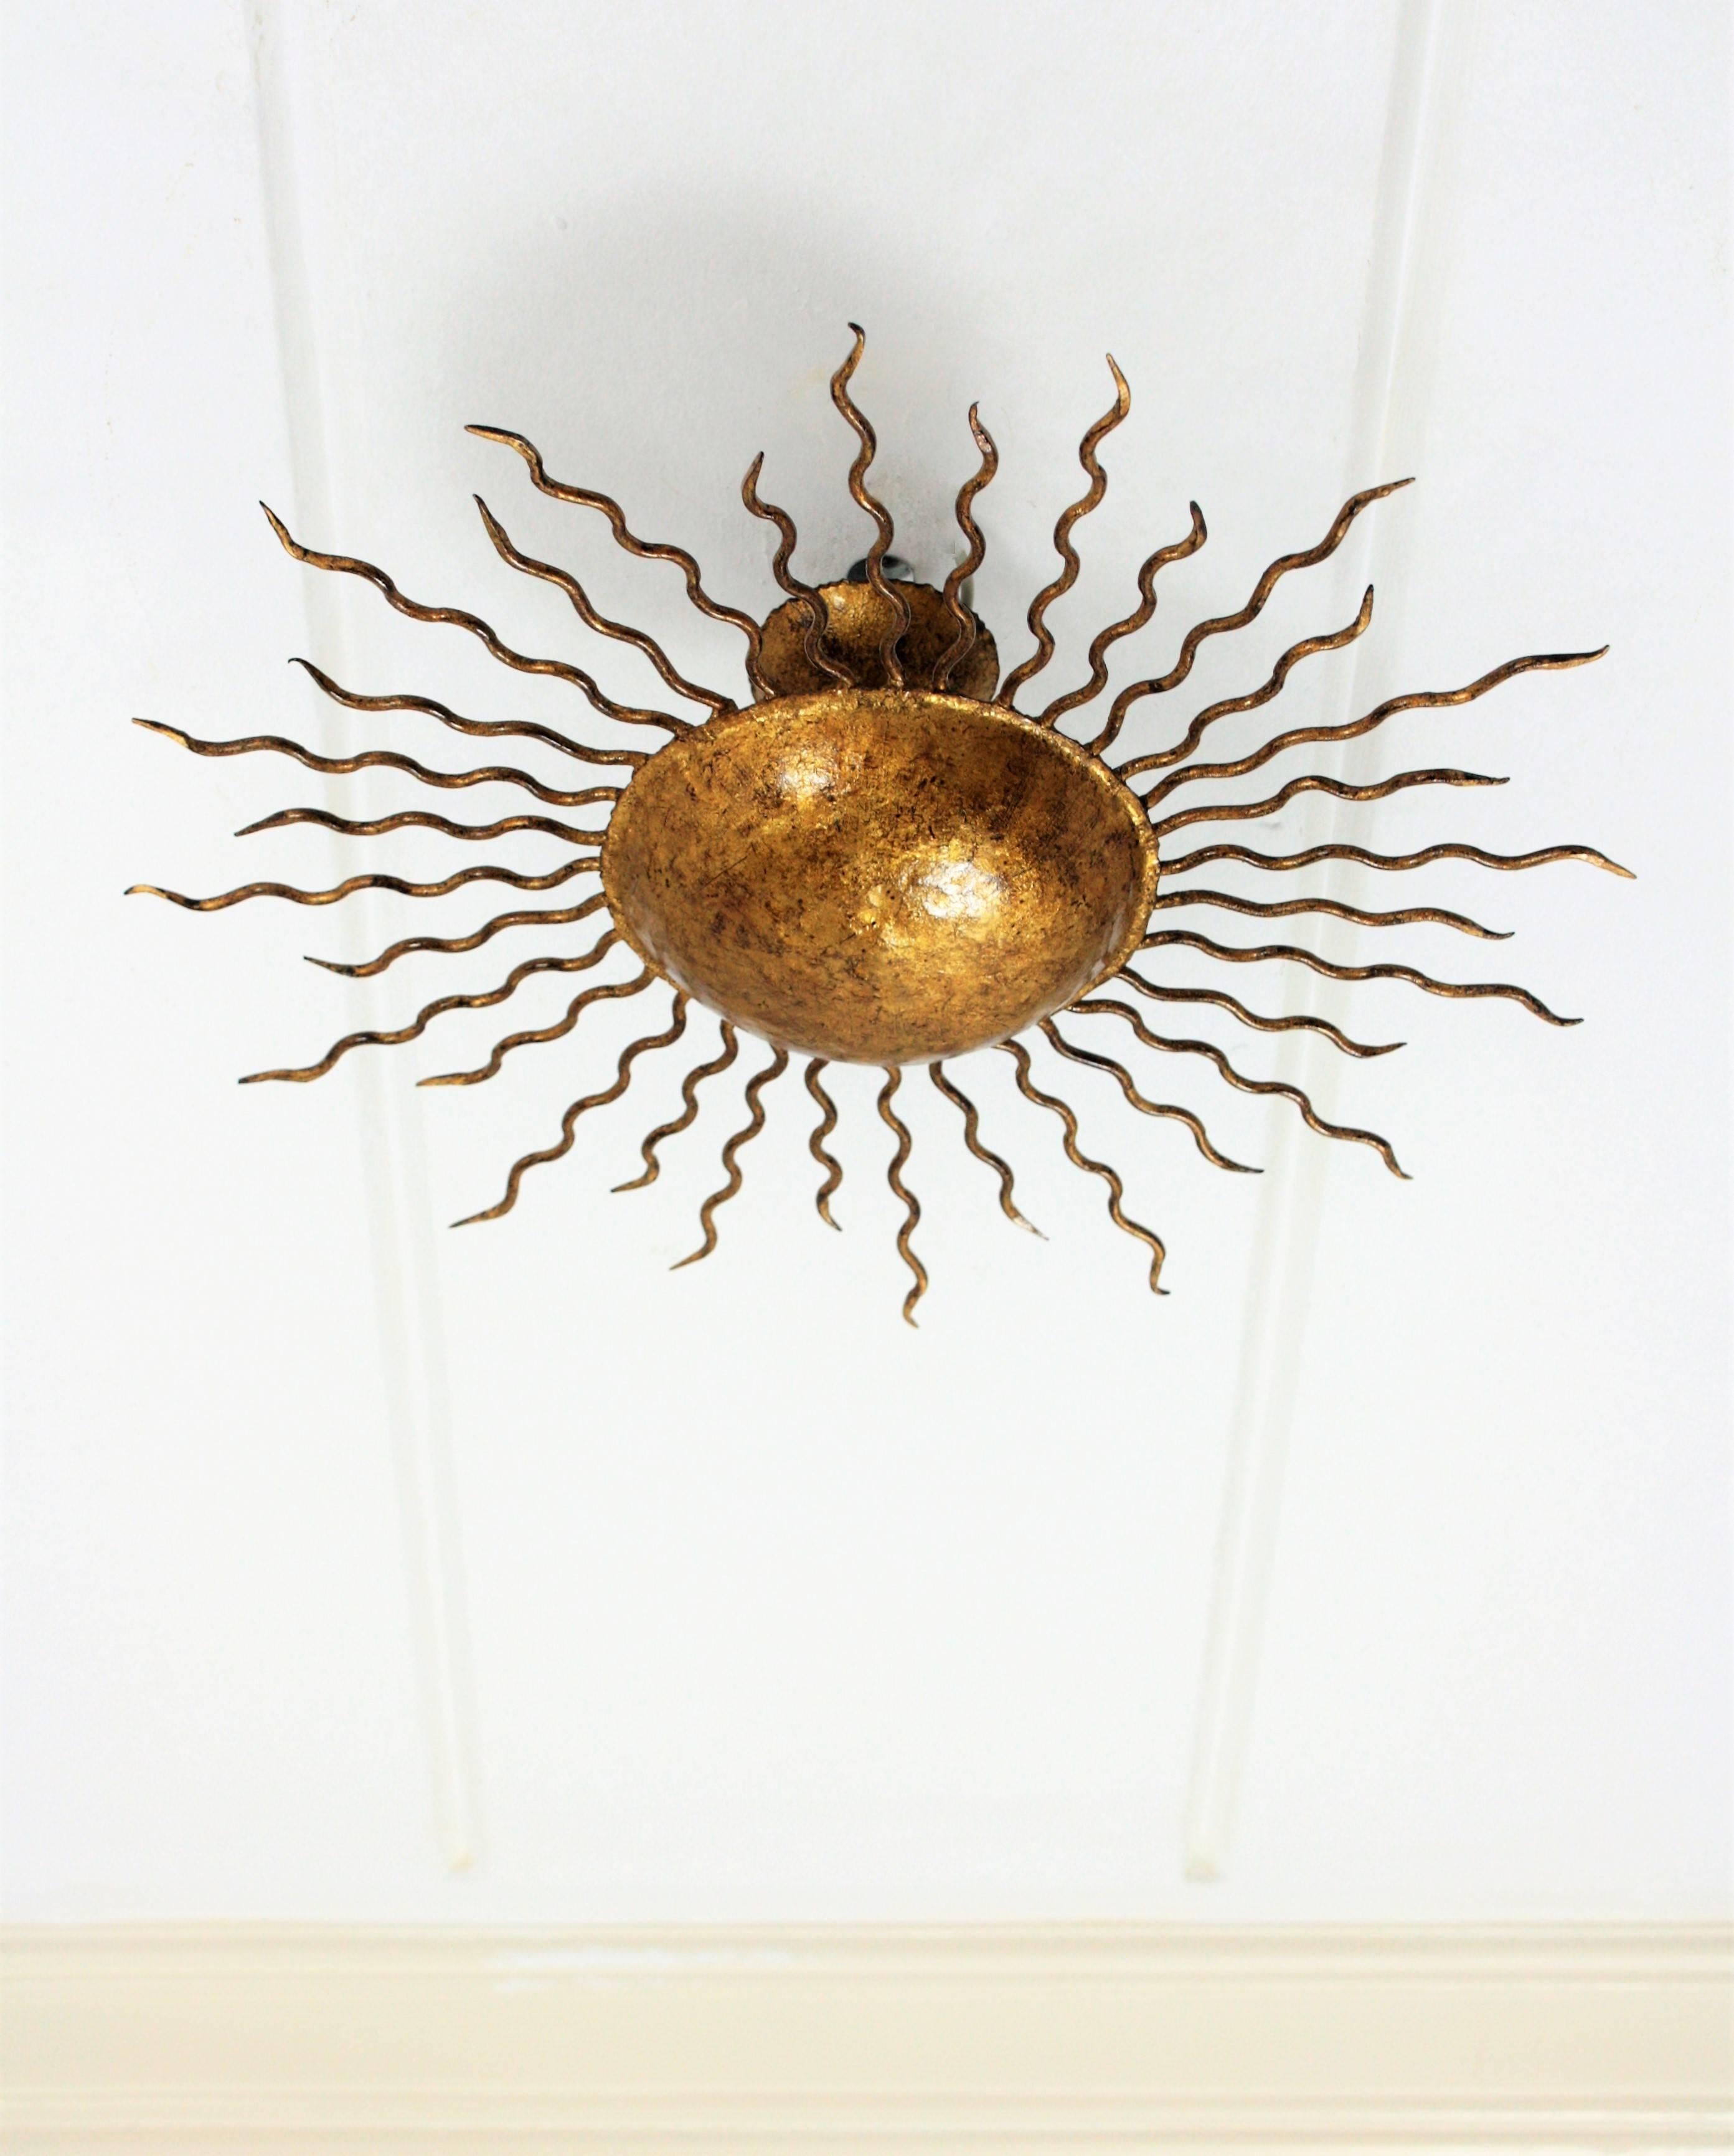 A hand-hammered sunburst gilt iron light fixture with curvy beams in different sizes. It can be used as ceiling light fixture, wall sconce or wall decoration. Spain, 1960s.
Measures: 42 cm diameter x 16 cm H.

Avaliable a huge collection of sunburst